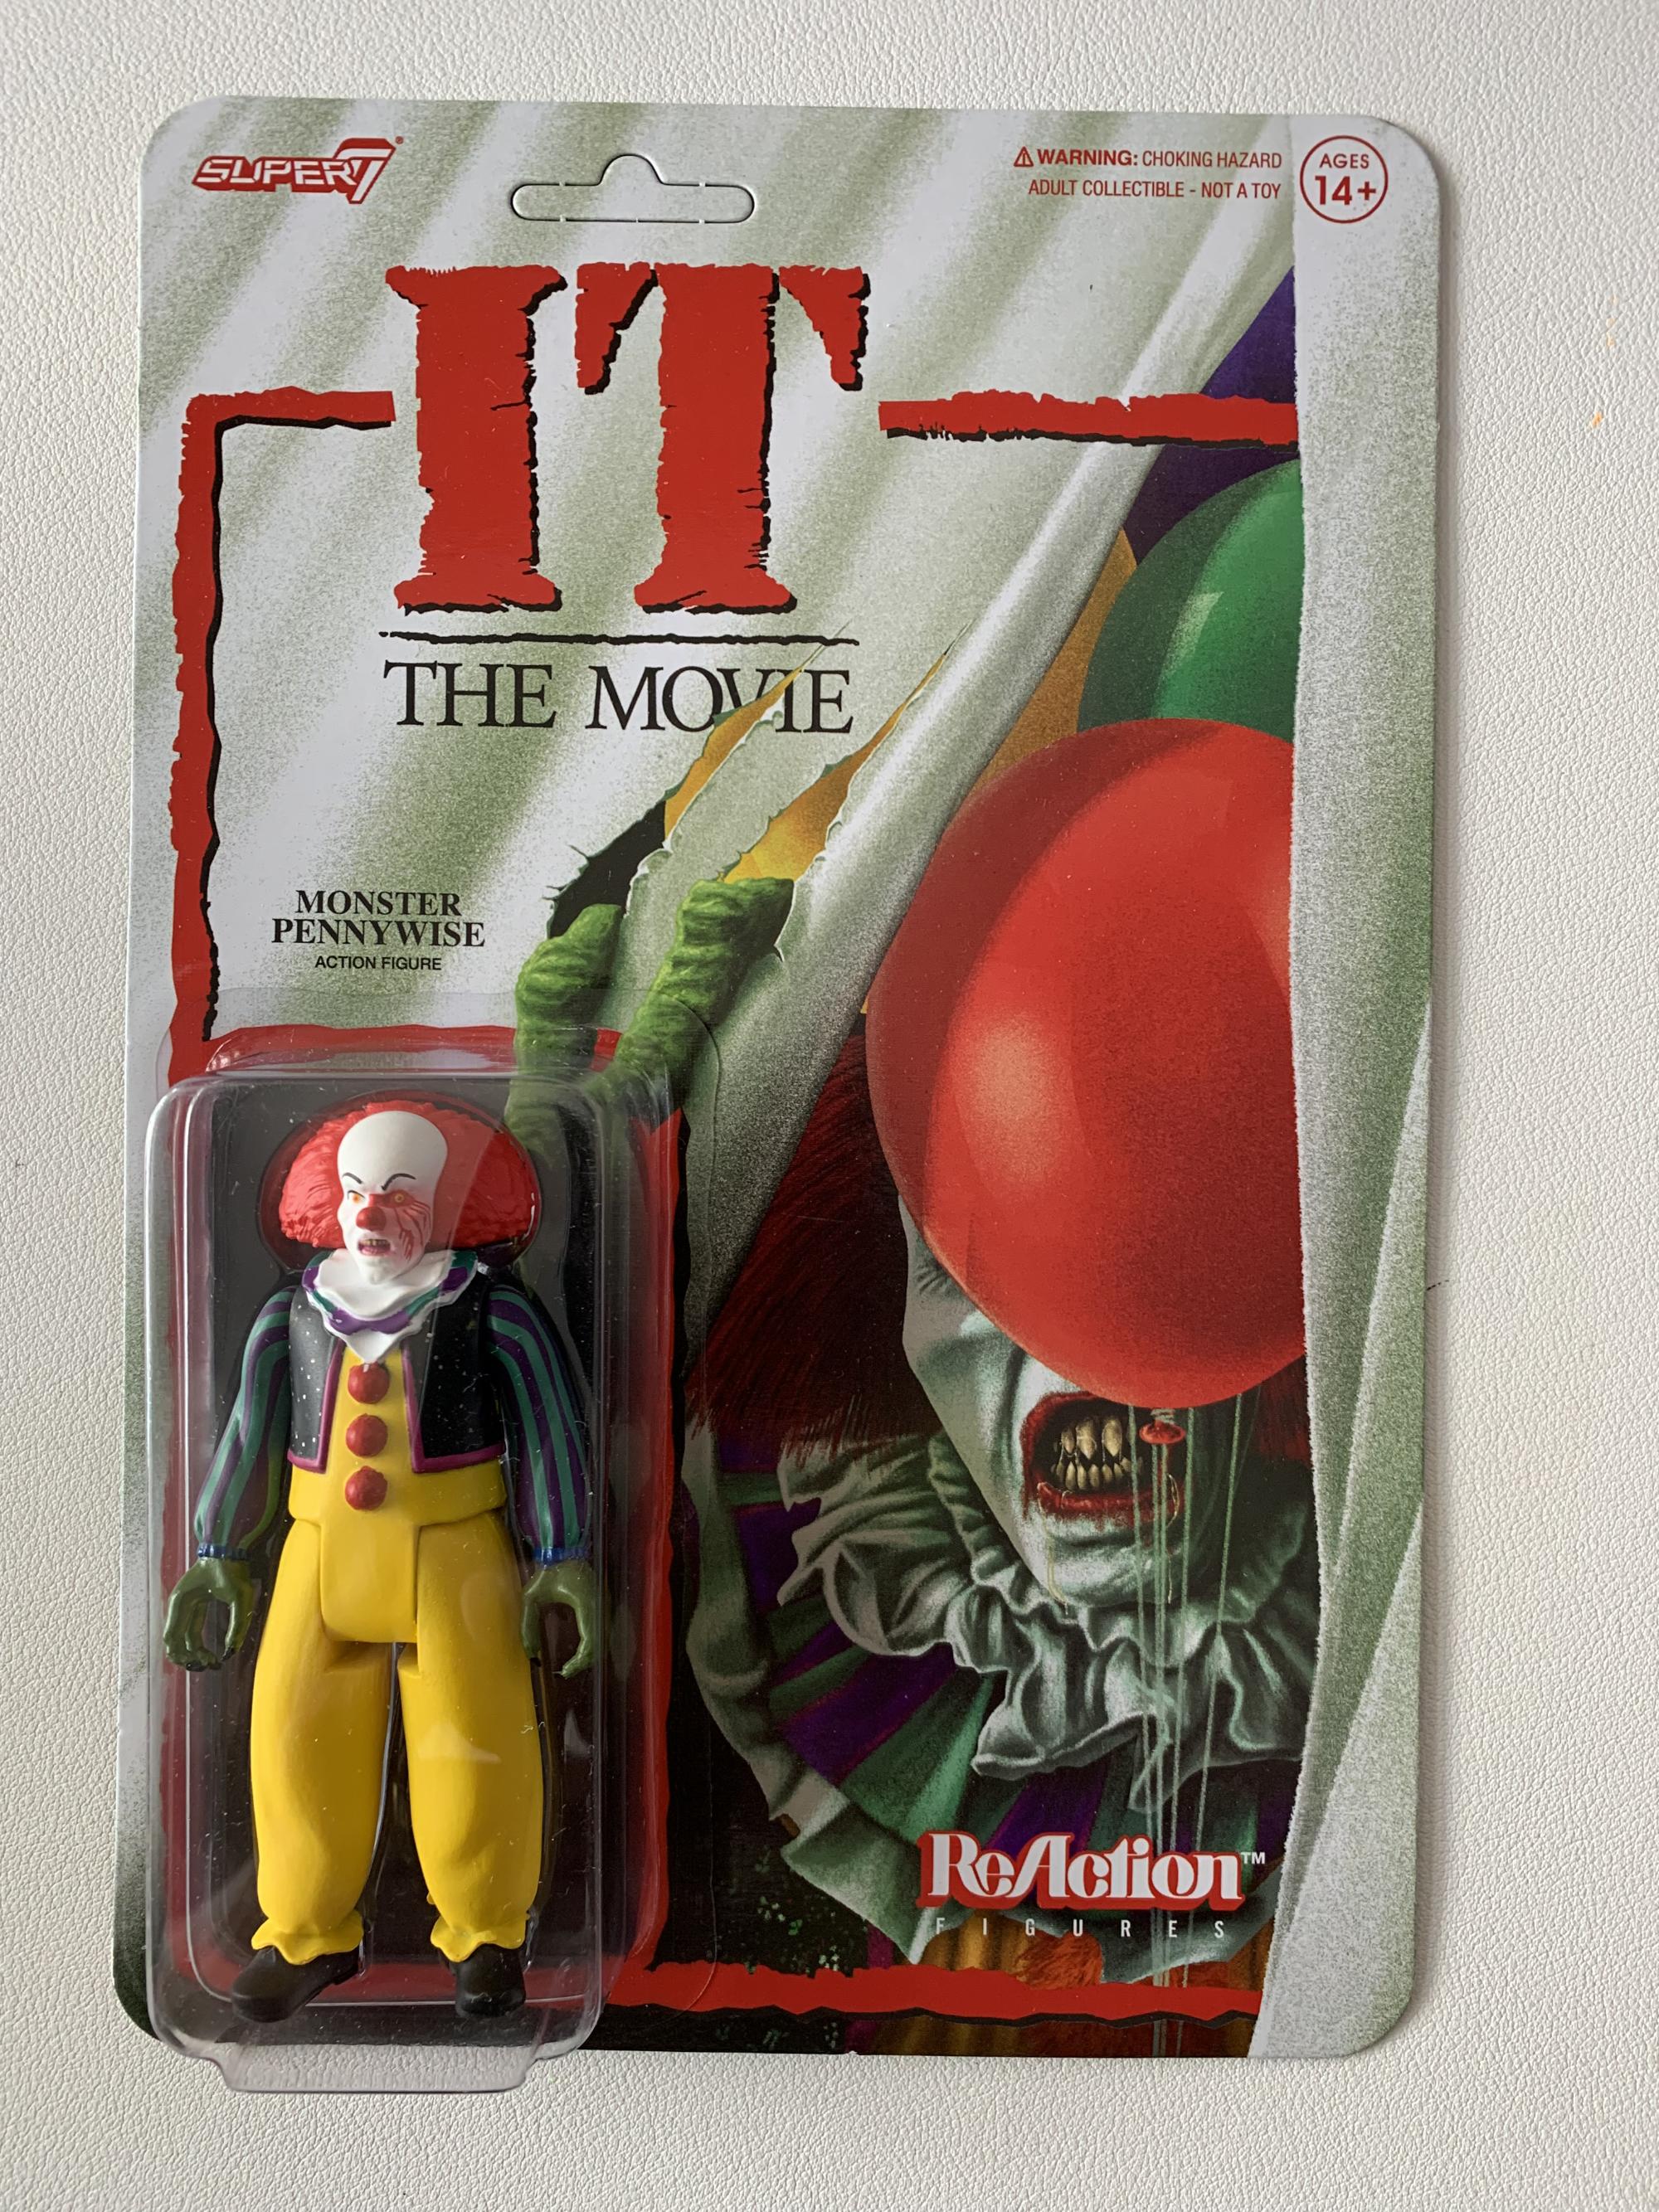 IT Monster Pennywise ReAction Figure from ‘IT The Movie’ made by Super7